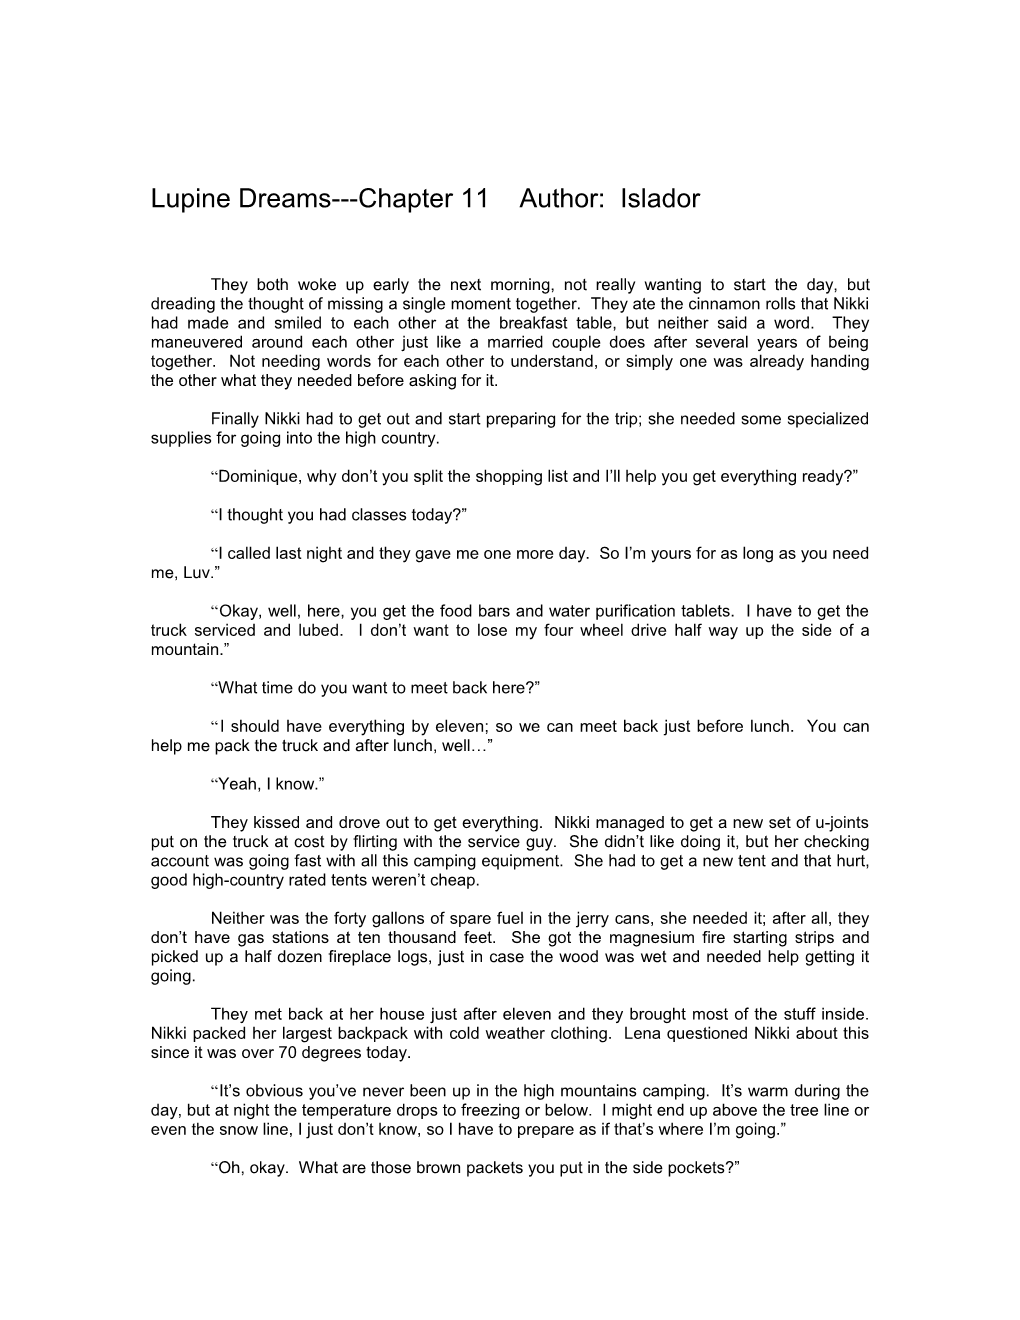 Lupine Dreams Chapter 11-Rev